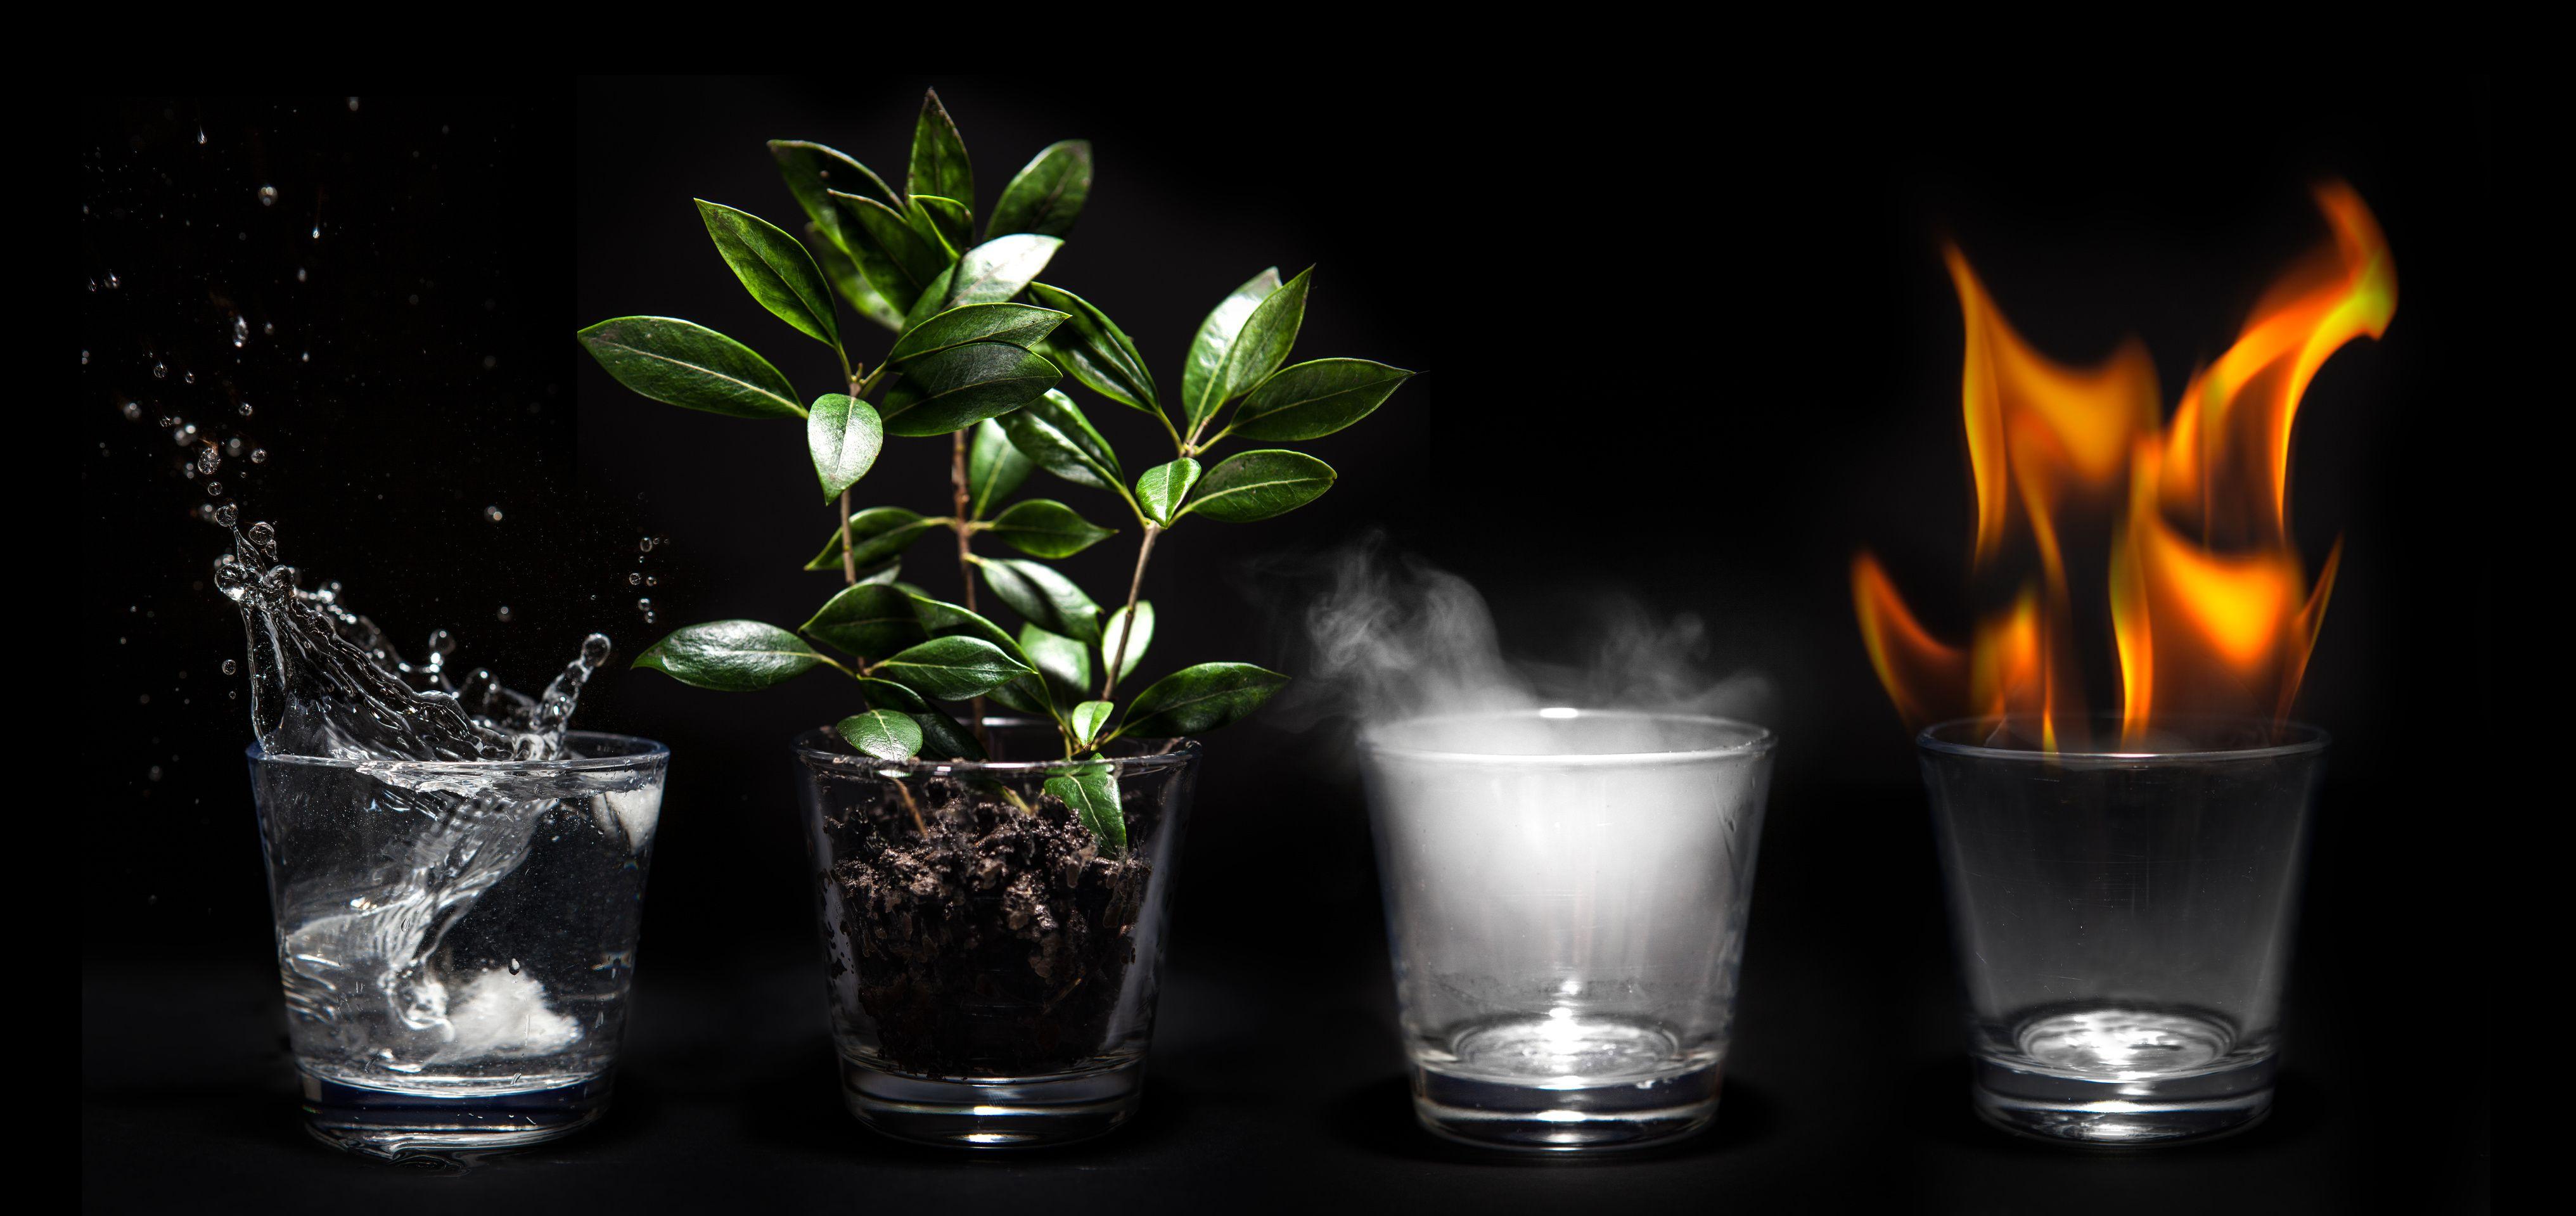 Image 4 elements glass cup fire earth air water Fire 4065x1919